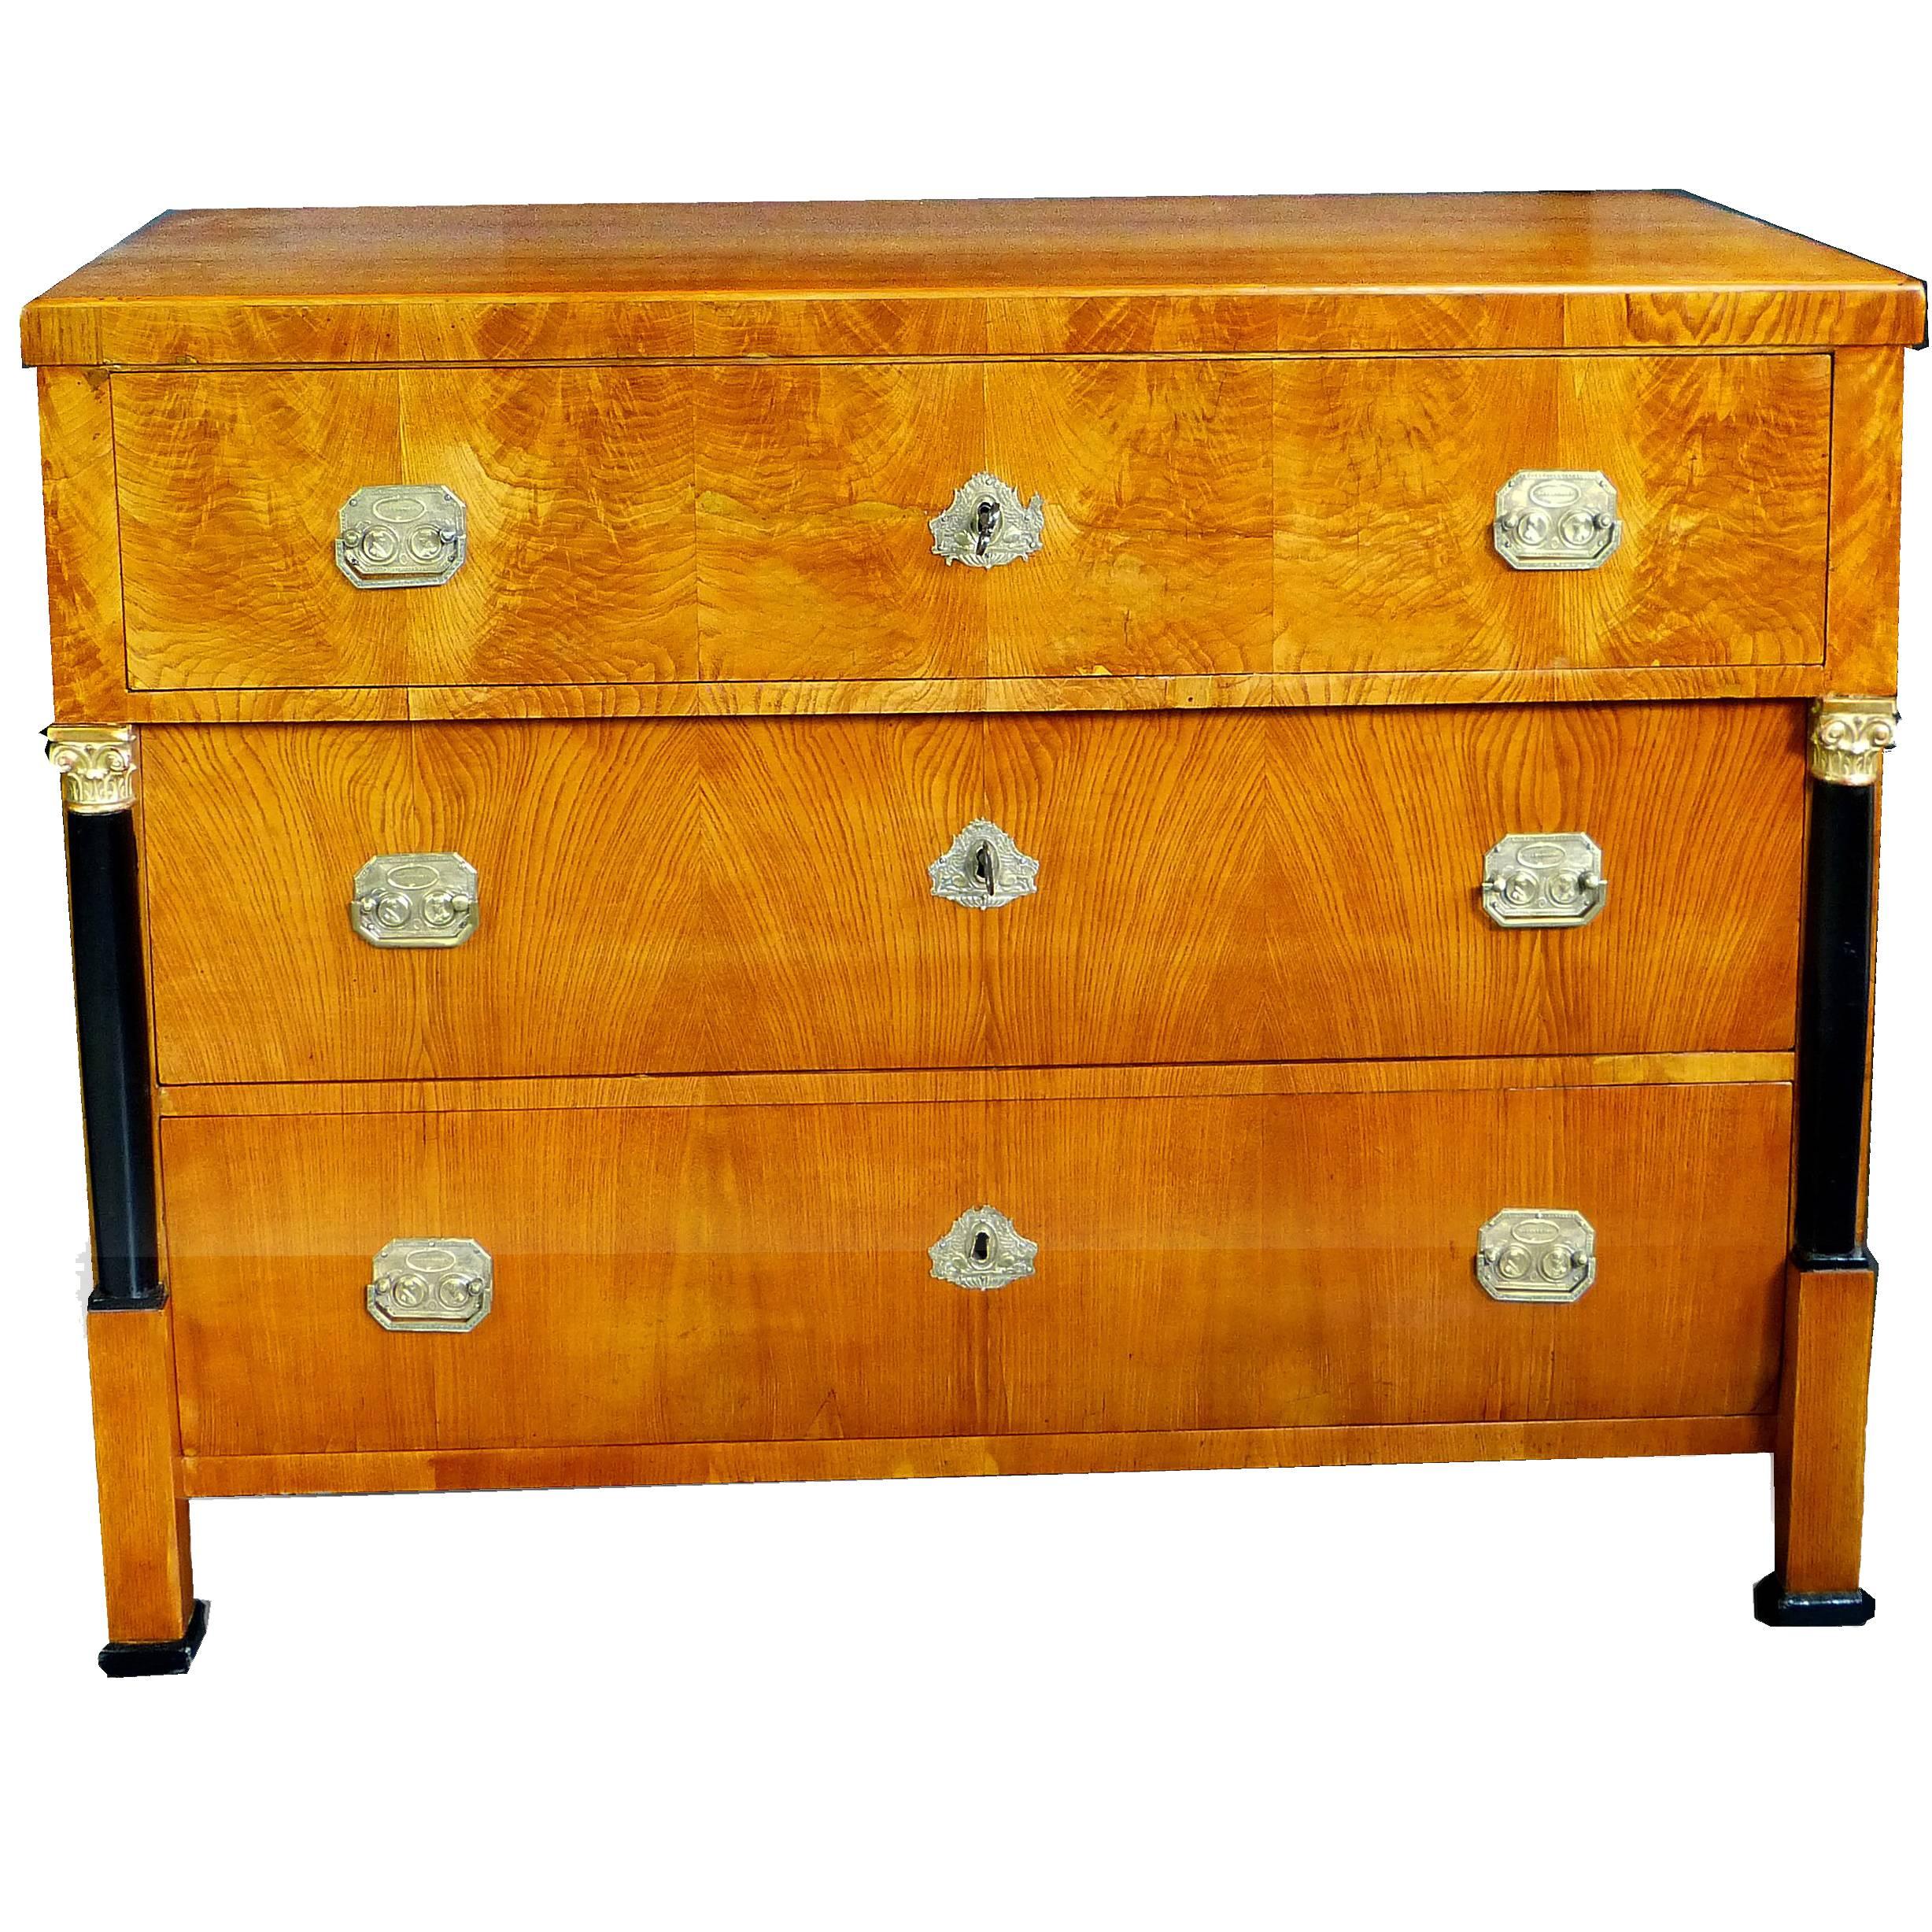 Chest of Drawers Late Empire Early Biedermeier Commode with Commemorative Pulls